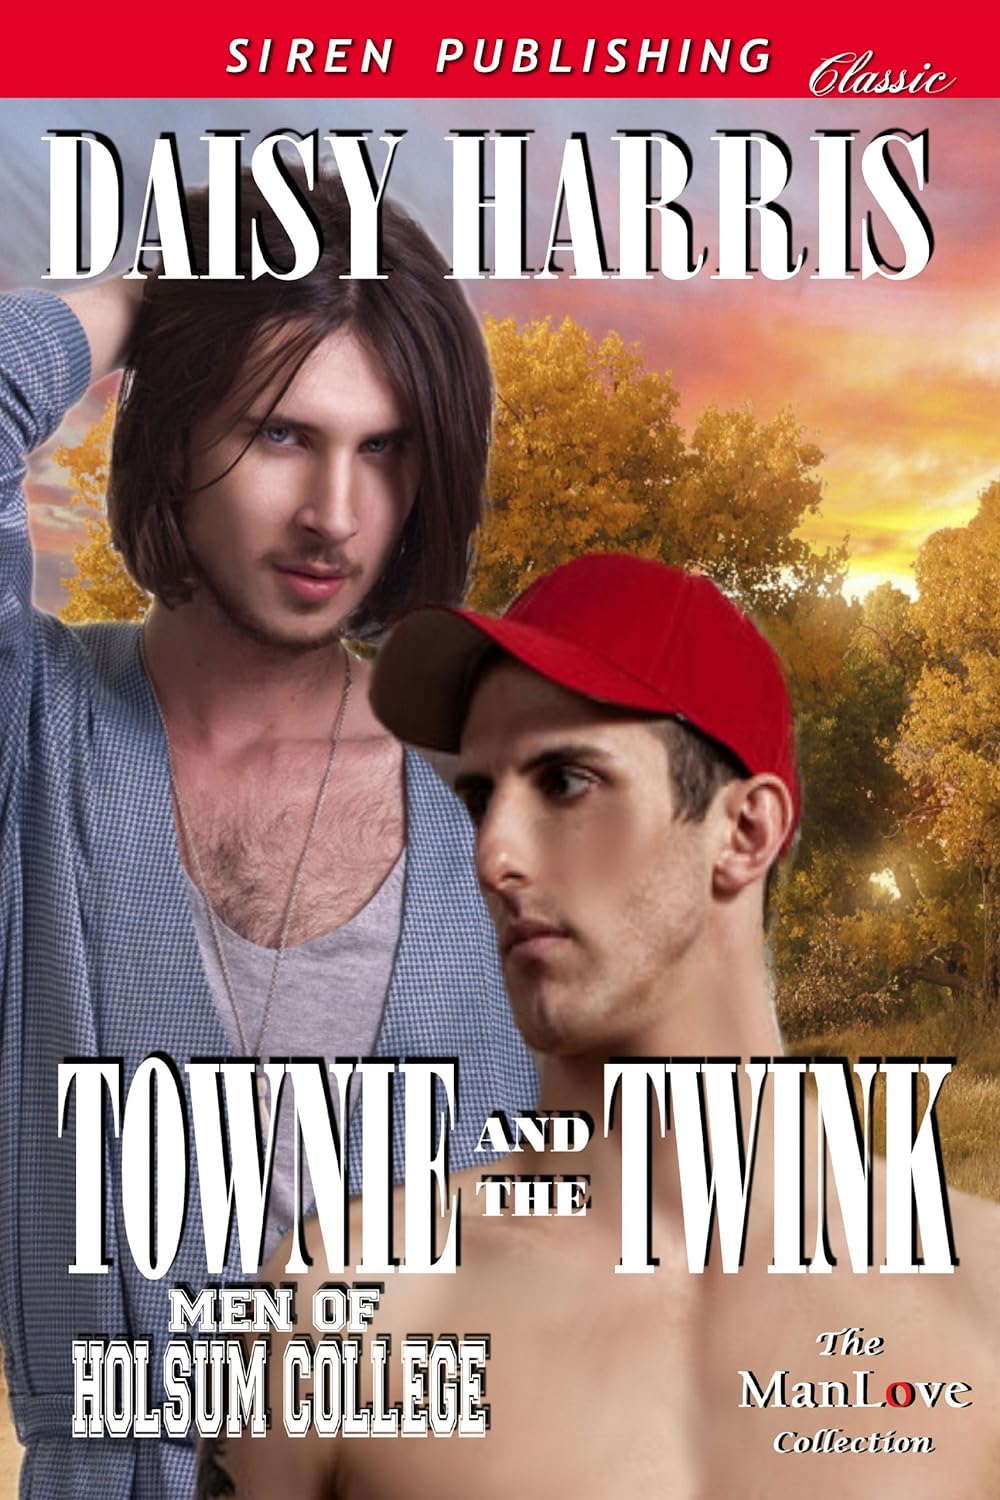 Townie and the Twink